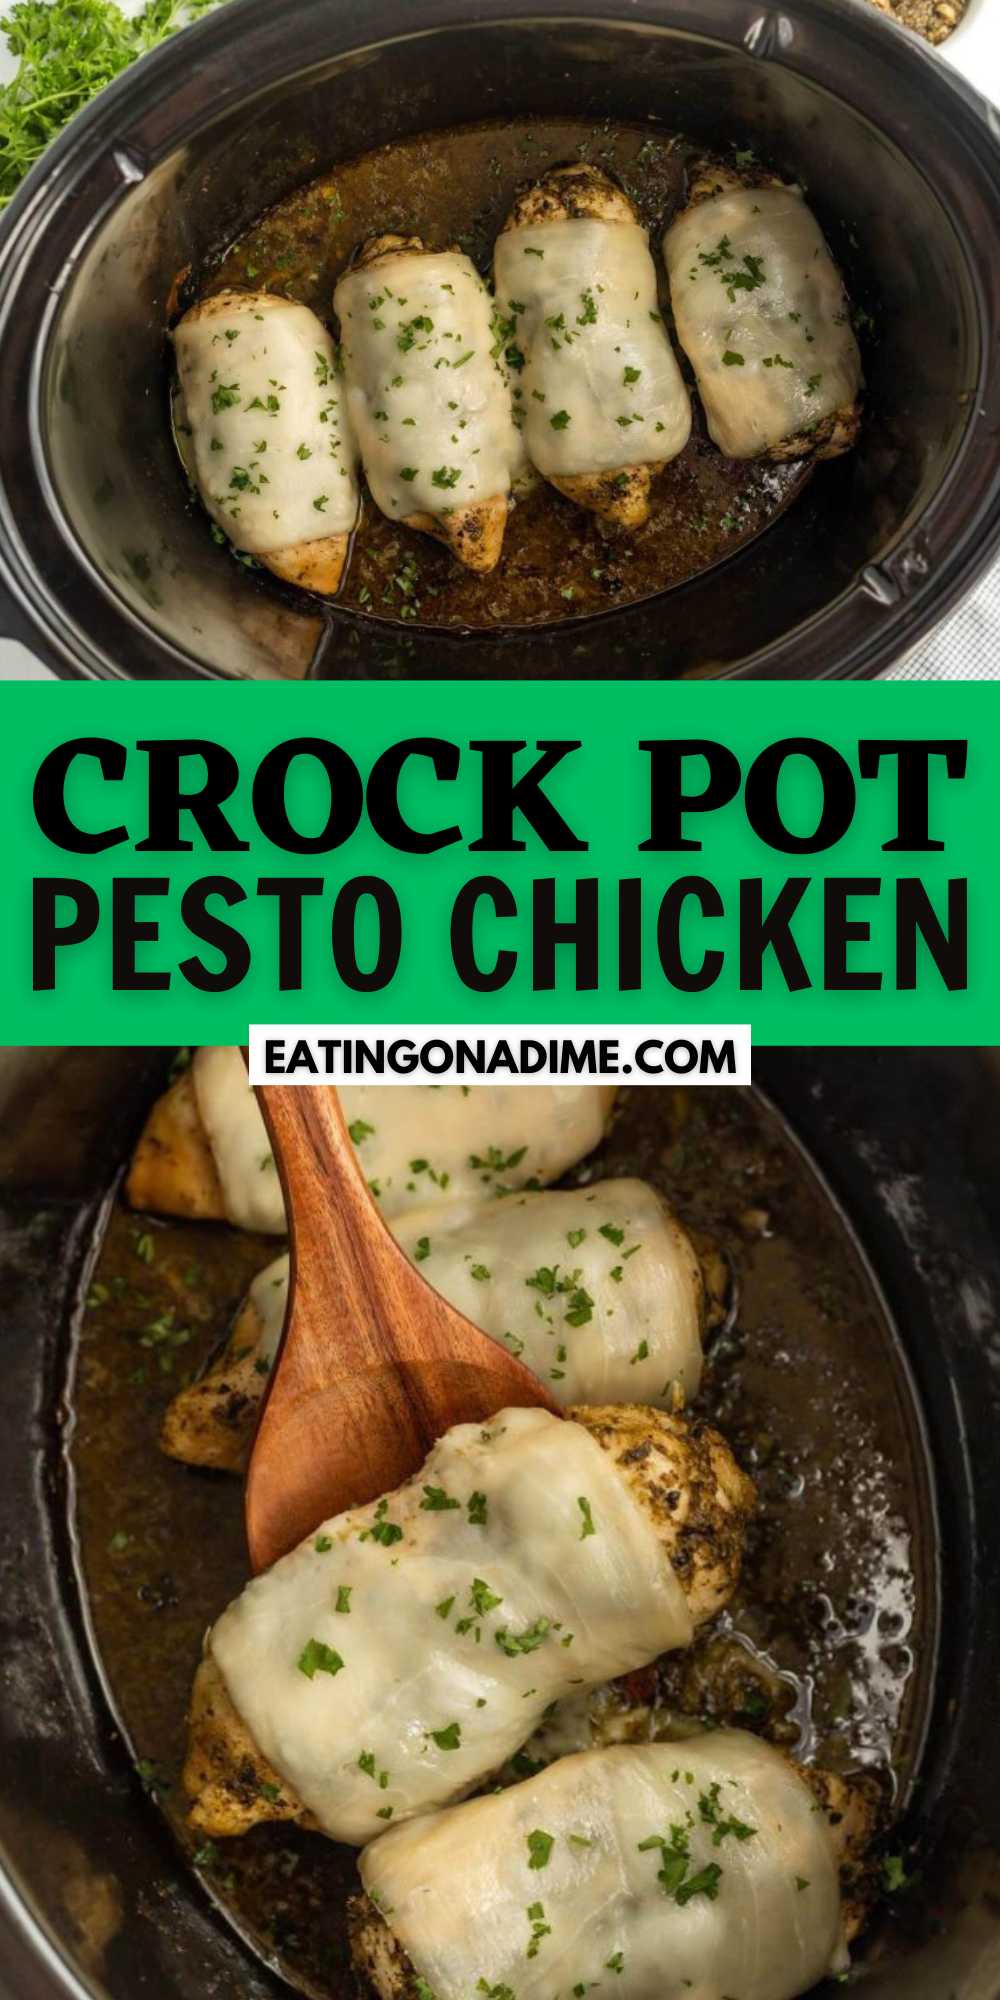 Crock Pot Pesto Chicken Recipe is keto friendly and tasty. The tender and flavorful chicken is topped with pesto and cheese for a tasty meal. Cheese makes everything better and there is definitely a ton of cheese on this delicious chicken. The pesto gives it an amazing flavor and you will love this easy meal idea. #eatingonadime #crockpotpestochicken #pestochicken #keto